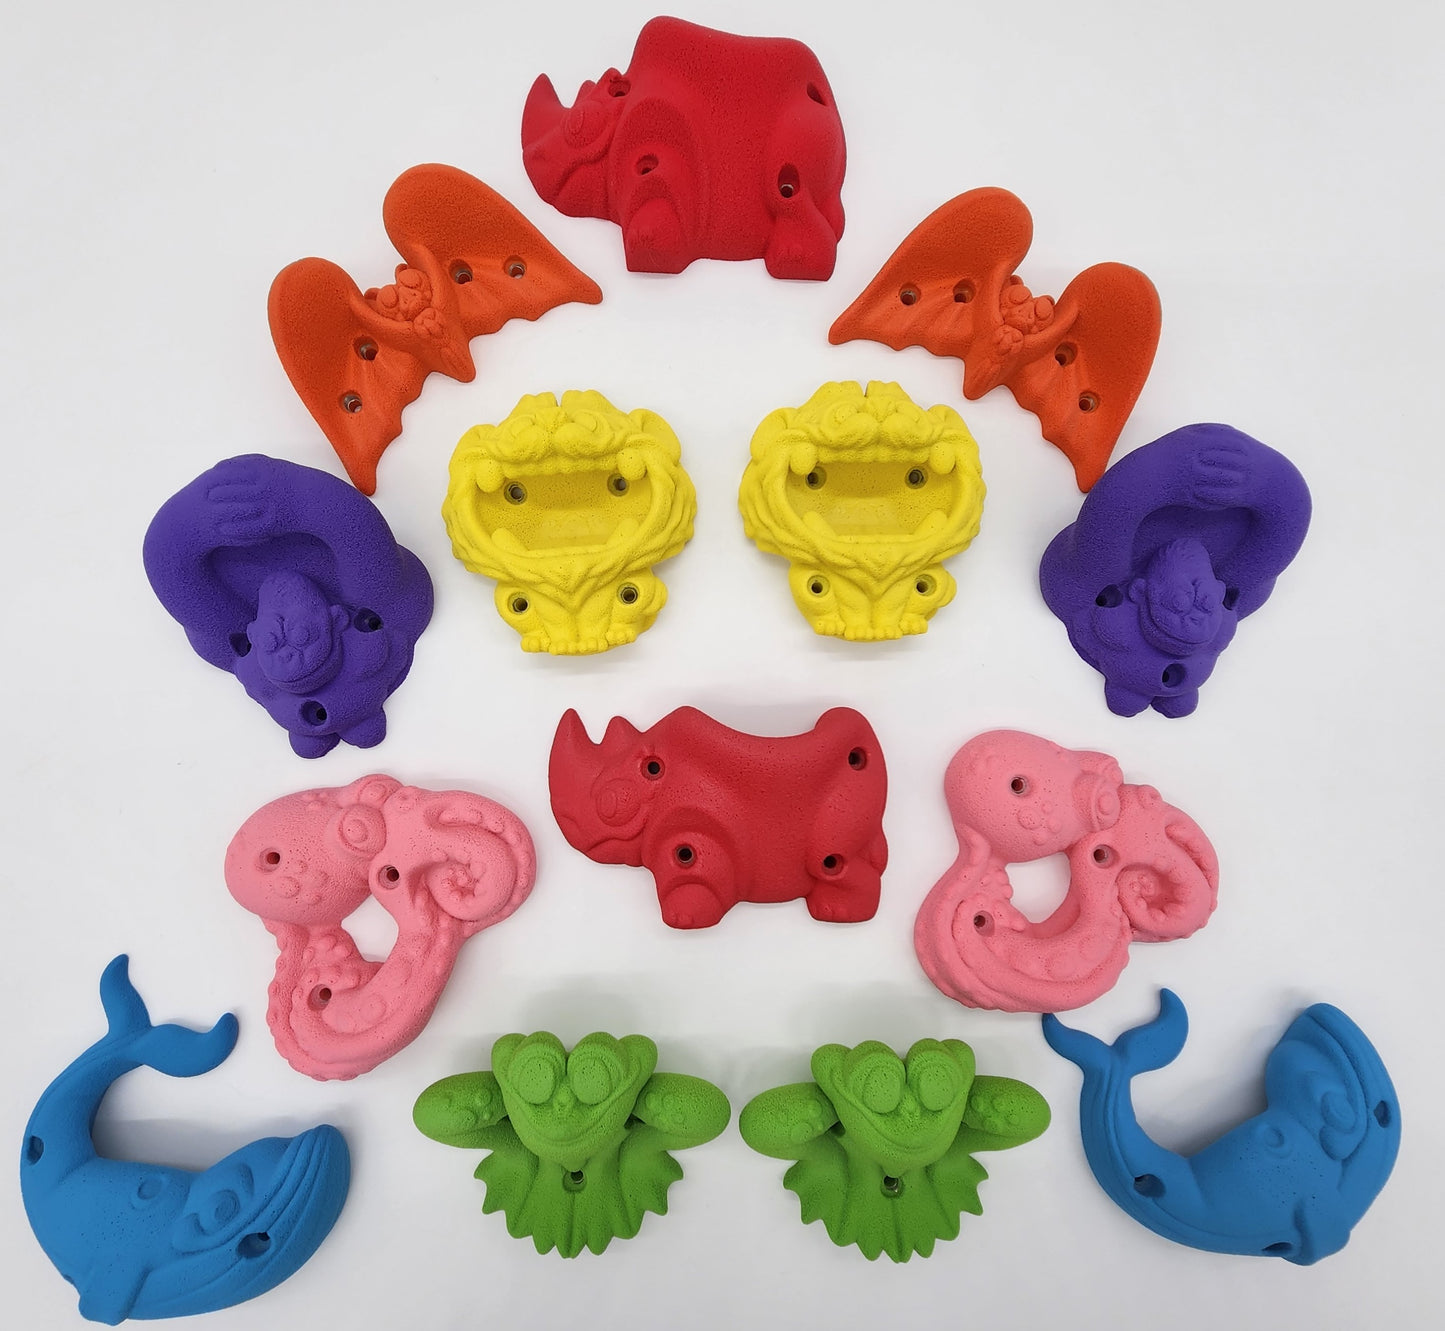 Animals and Sea Creatures Climbing Holds for Kids! 14 Piece Screw On Climbing Hold Set